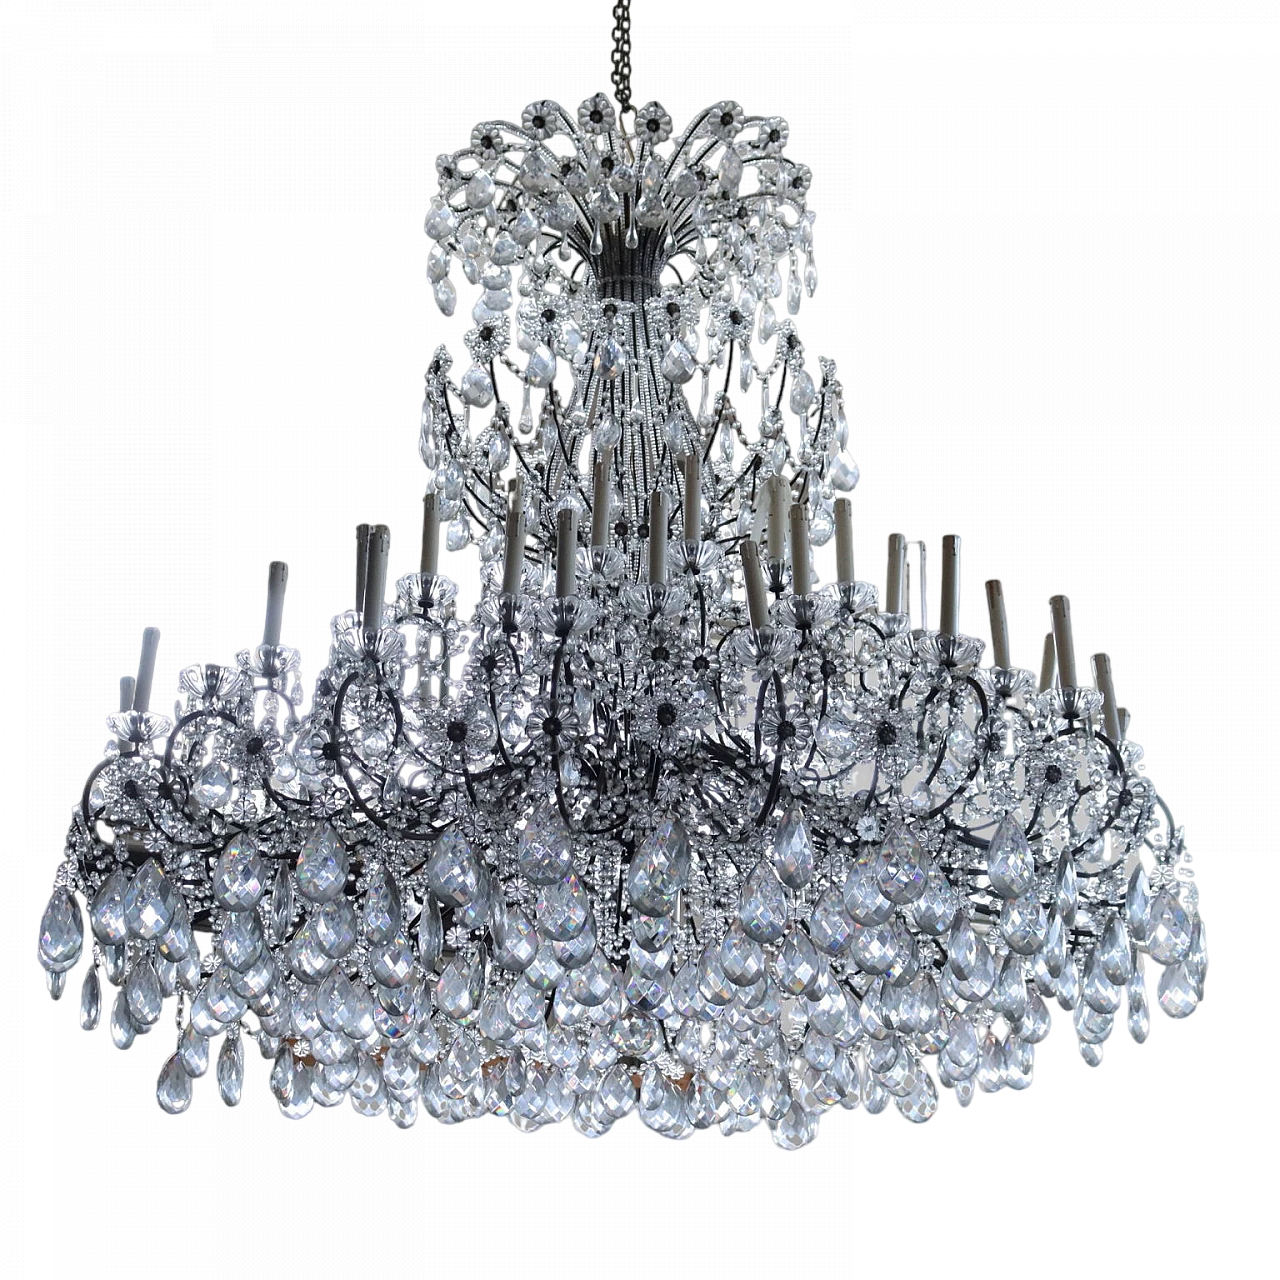 Three-stage chandelier in metal, glass and crystal 9